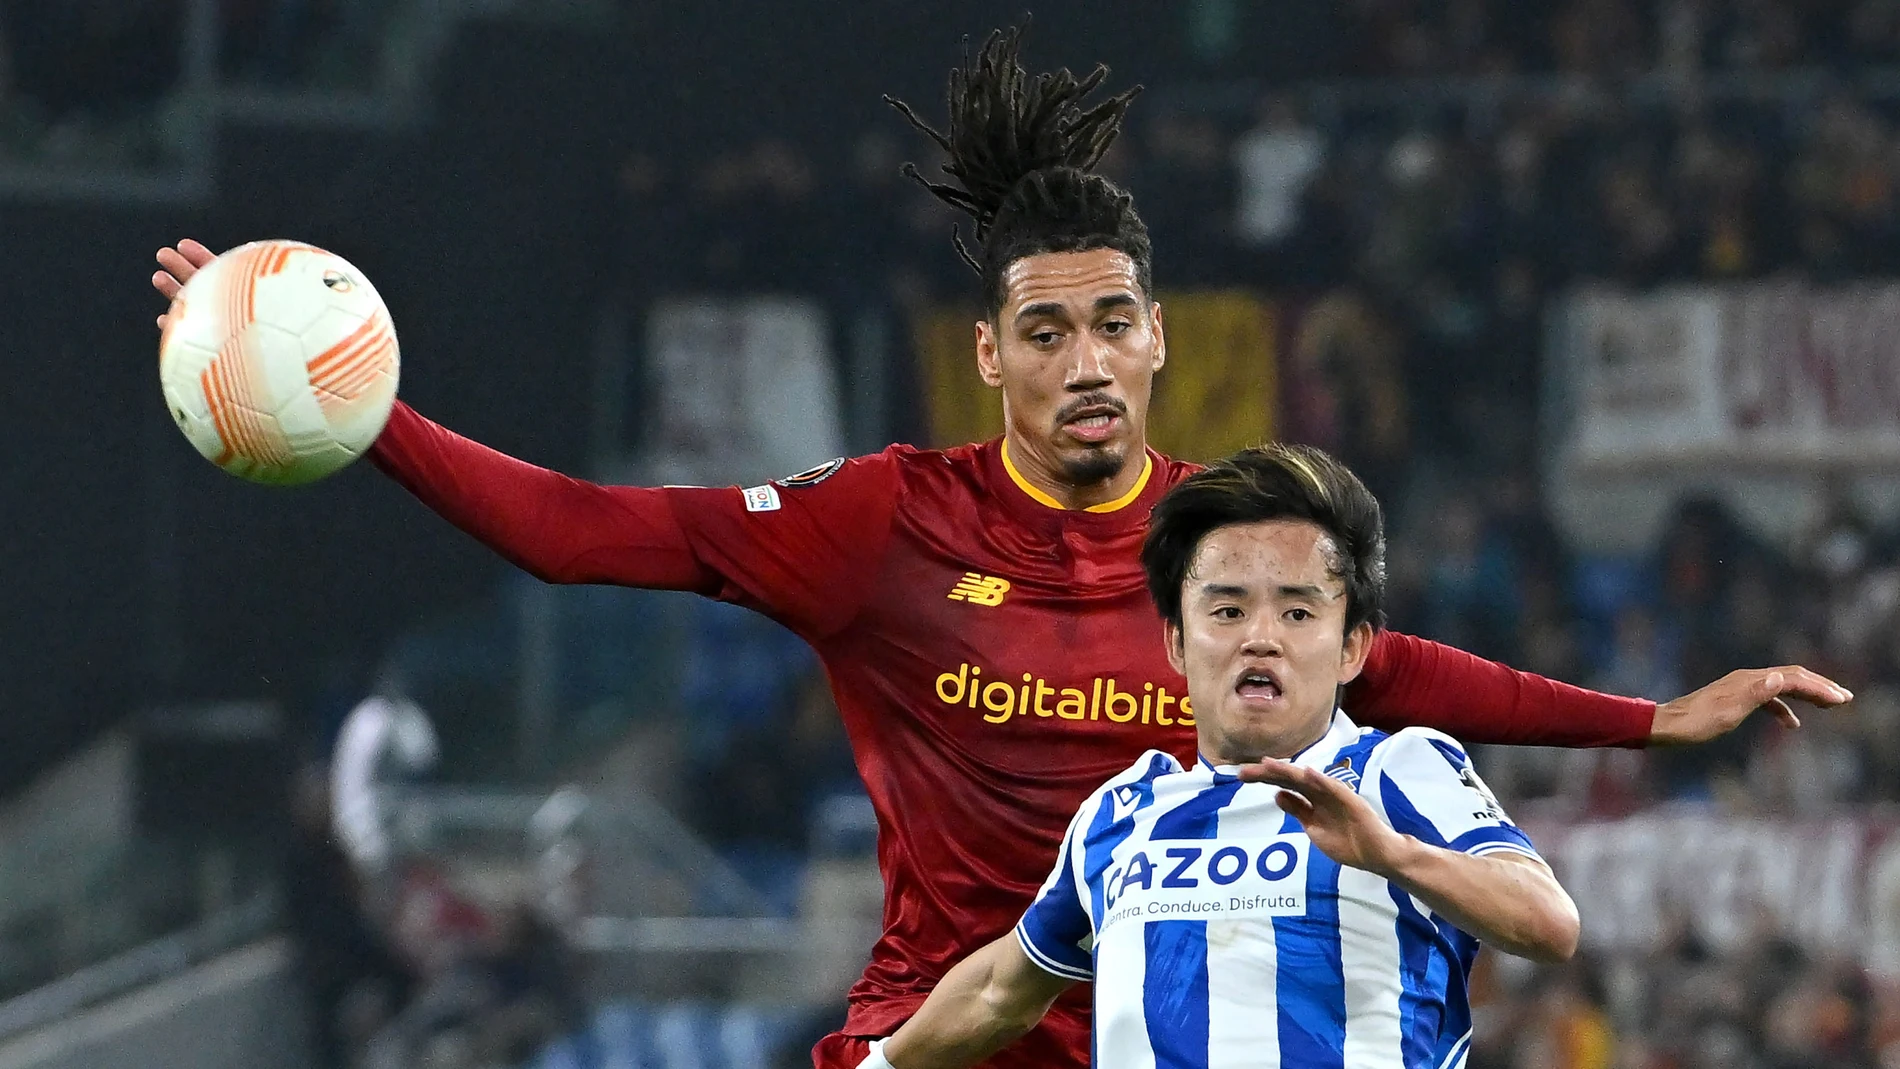 Rome (Italy), 09/03/2023.- AS Roma's Chris Smalling (L) vies for the ball with Real Sociedad's Takefusa Kubo during the UEFA Europa League round of 16 first leg soccer match between AS Roma and Real Sociedad, in Rome, Italy, 09 March 2023. (Italia, Estados Unidos, Roma) EFE/EPA/ETTORE FERRARI